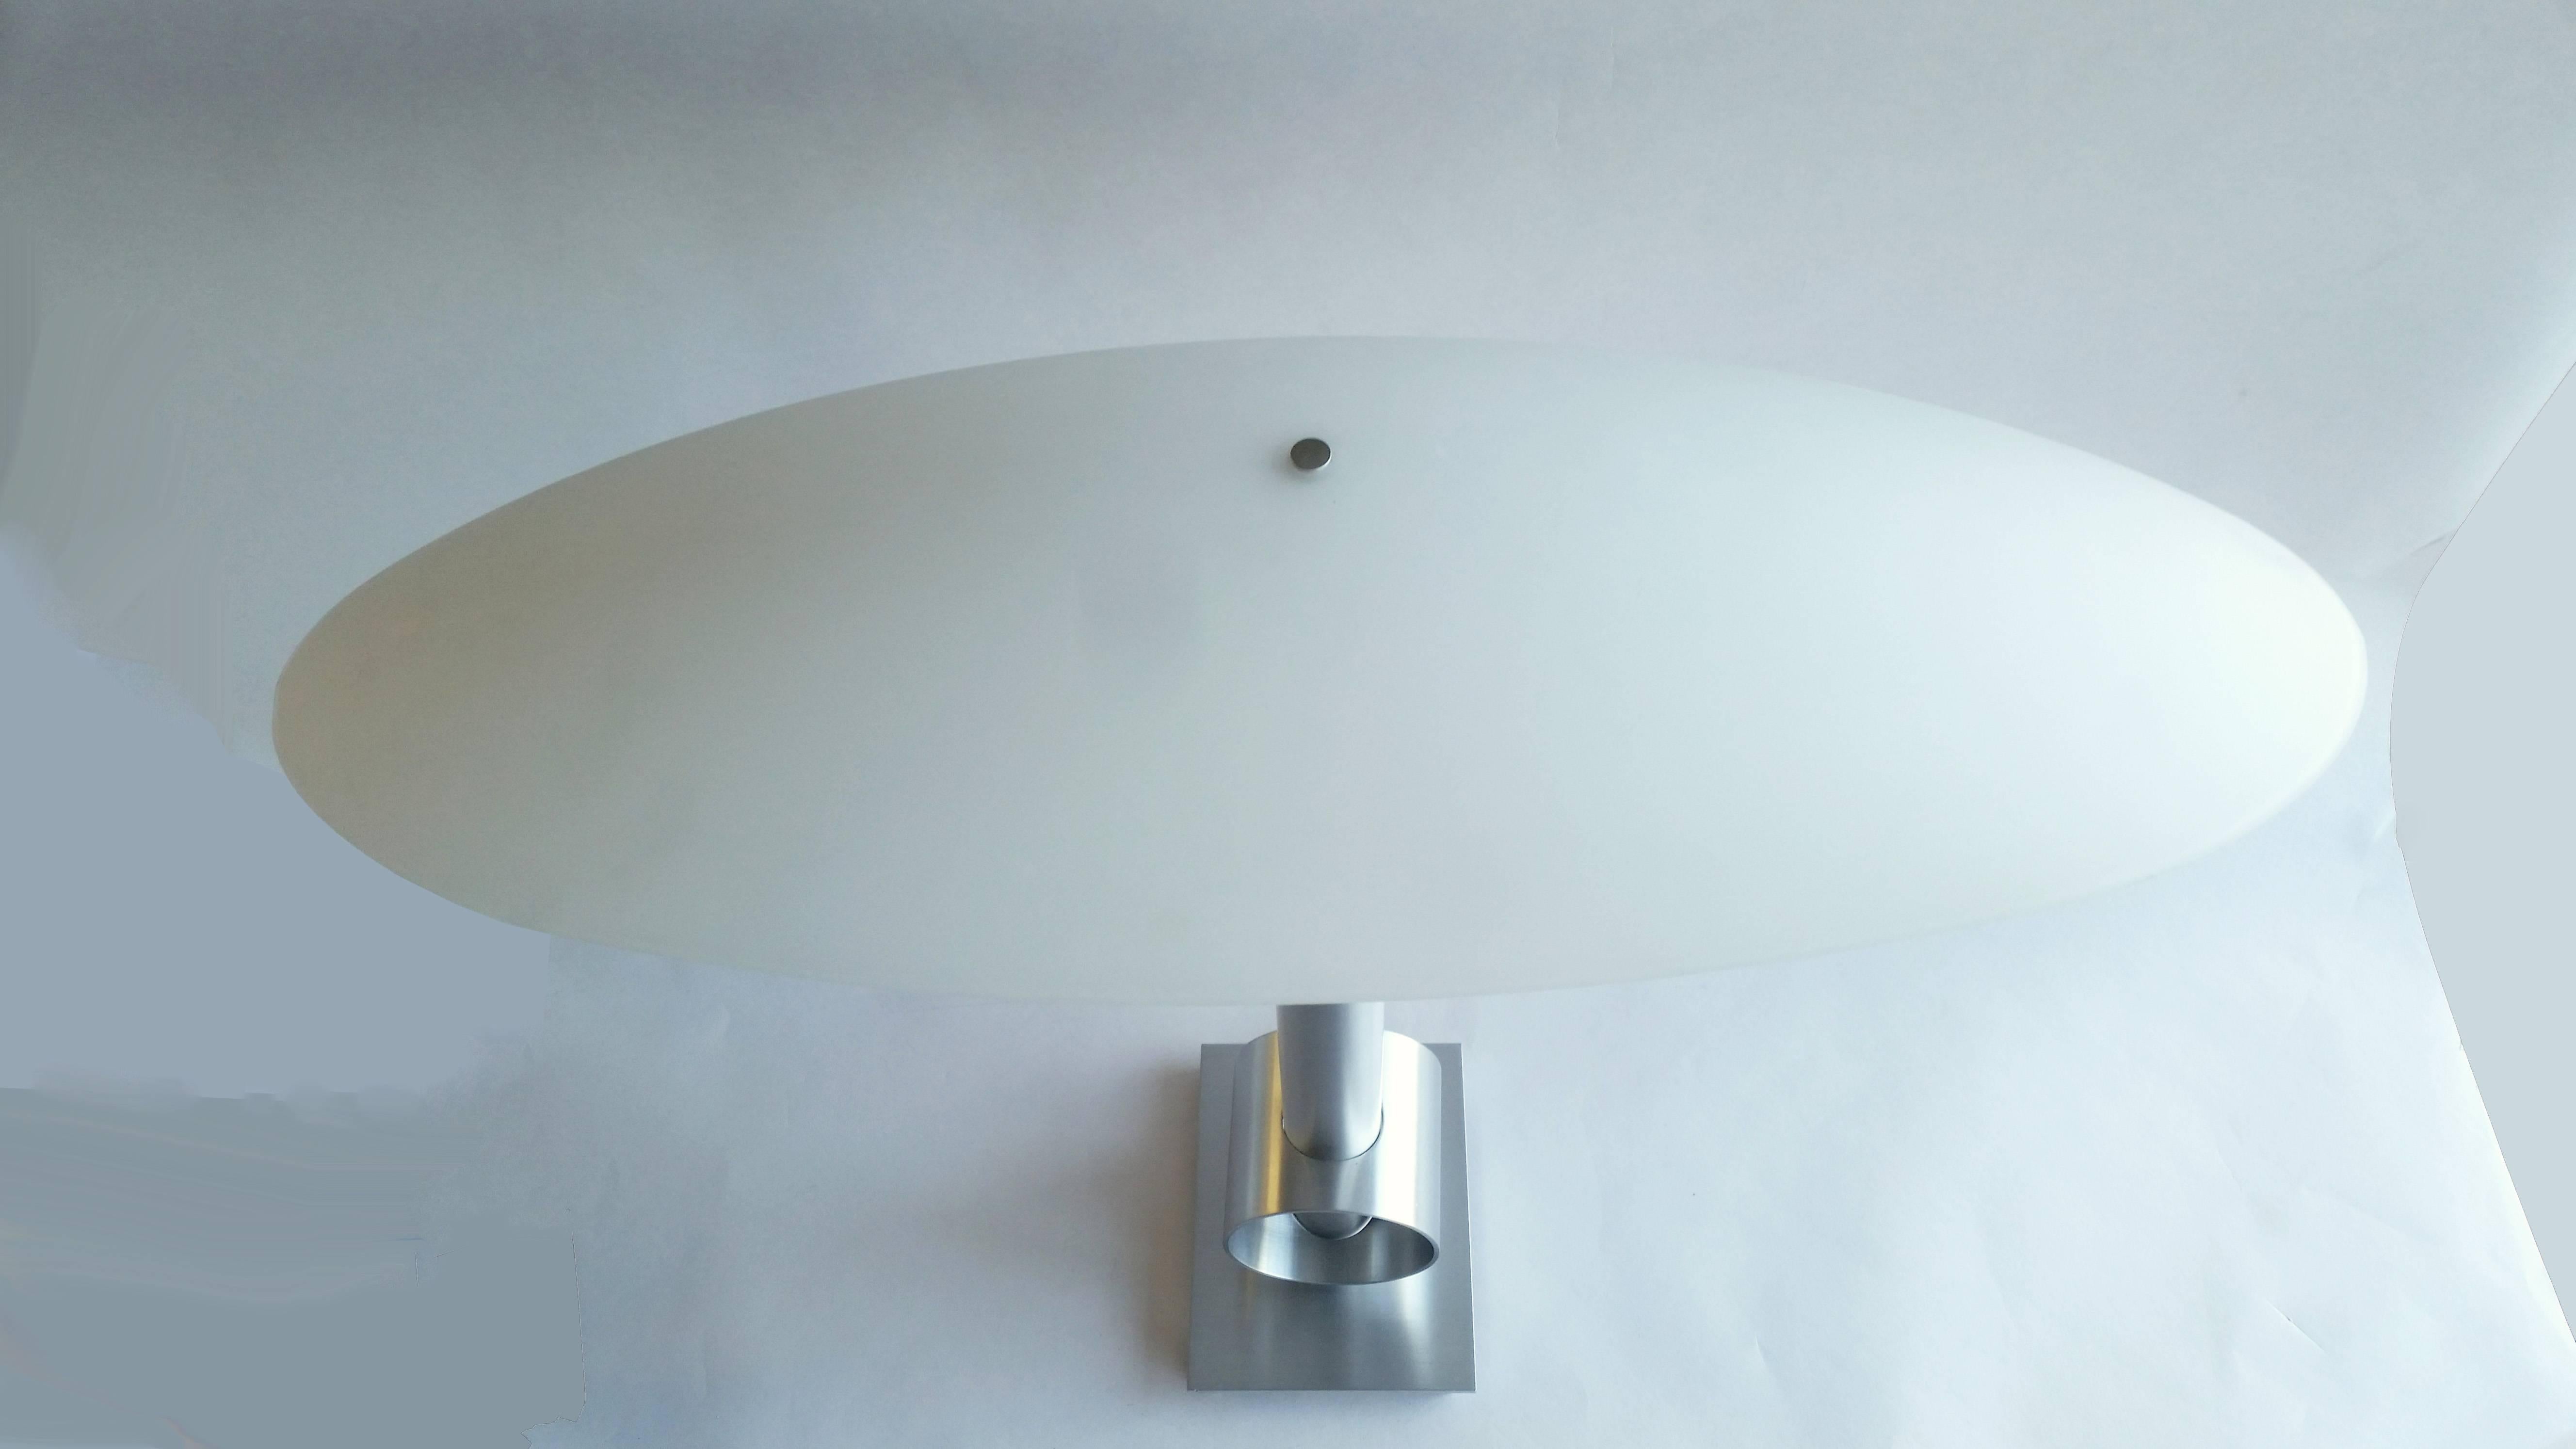 Mid-Century Modern with Bauhaus lines table lamp with large oval glass shade in satin aluminum. See additional photos for shade proportions. Incandescent lamping.

Architect, Sandy Littman of Duesenberg LTD.  and The American Glass Light Company